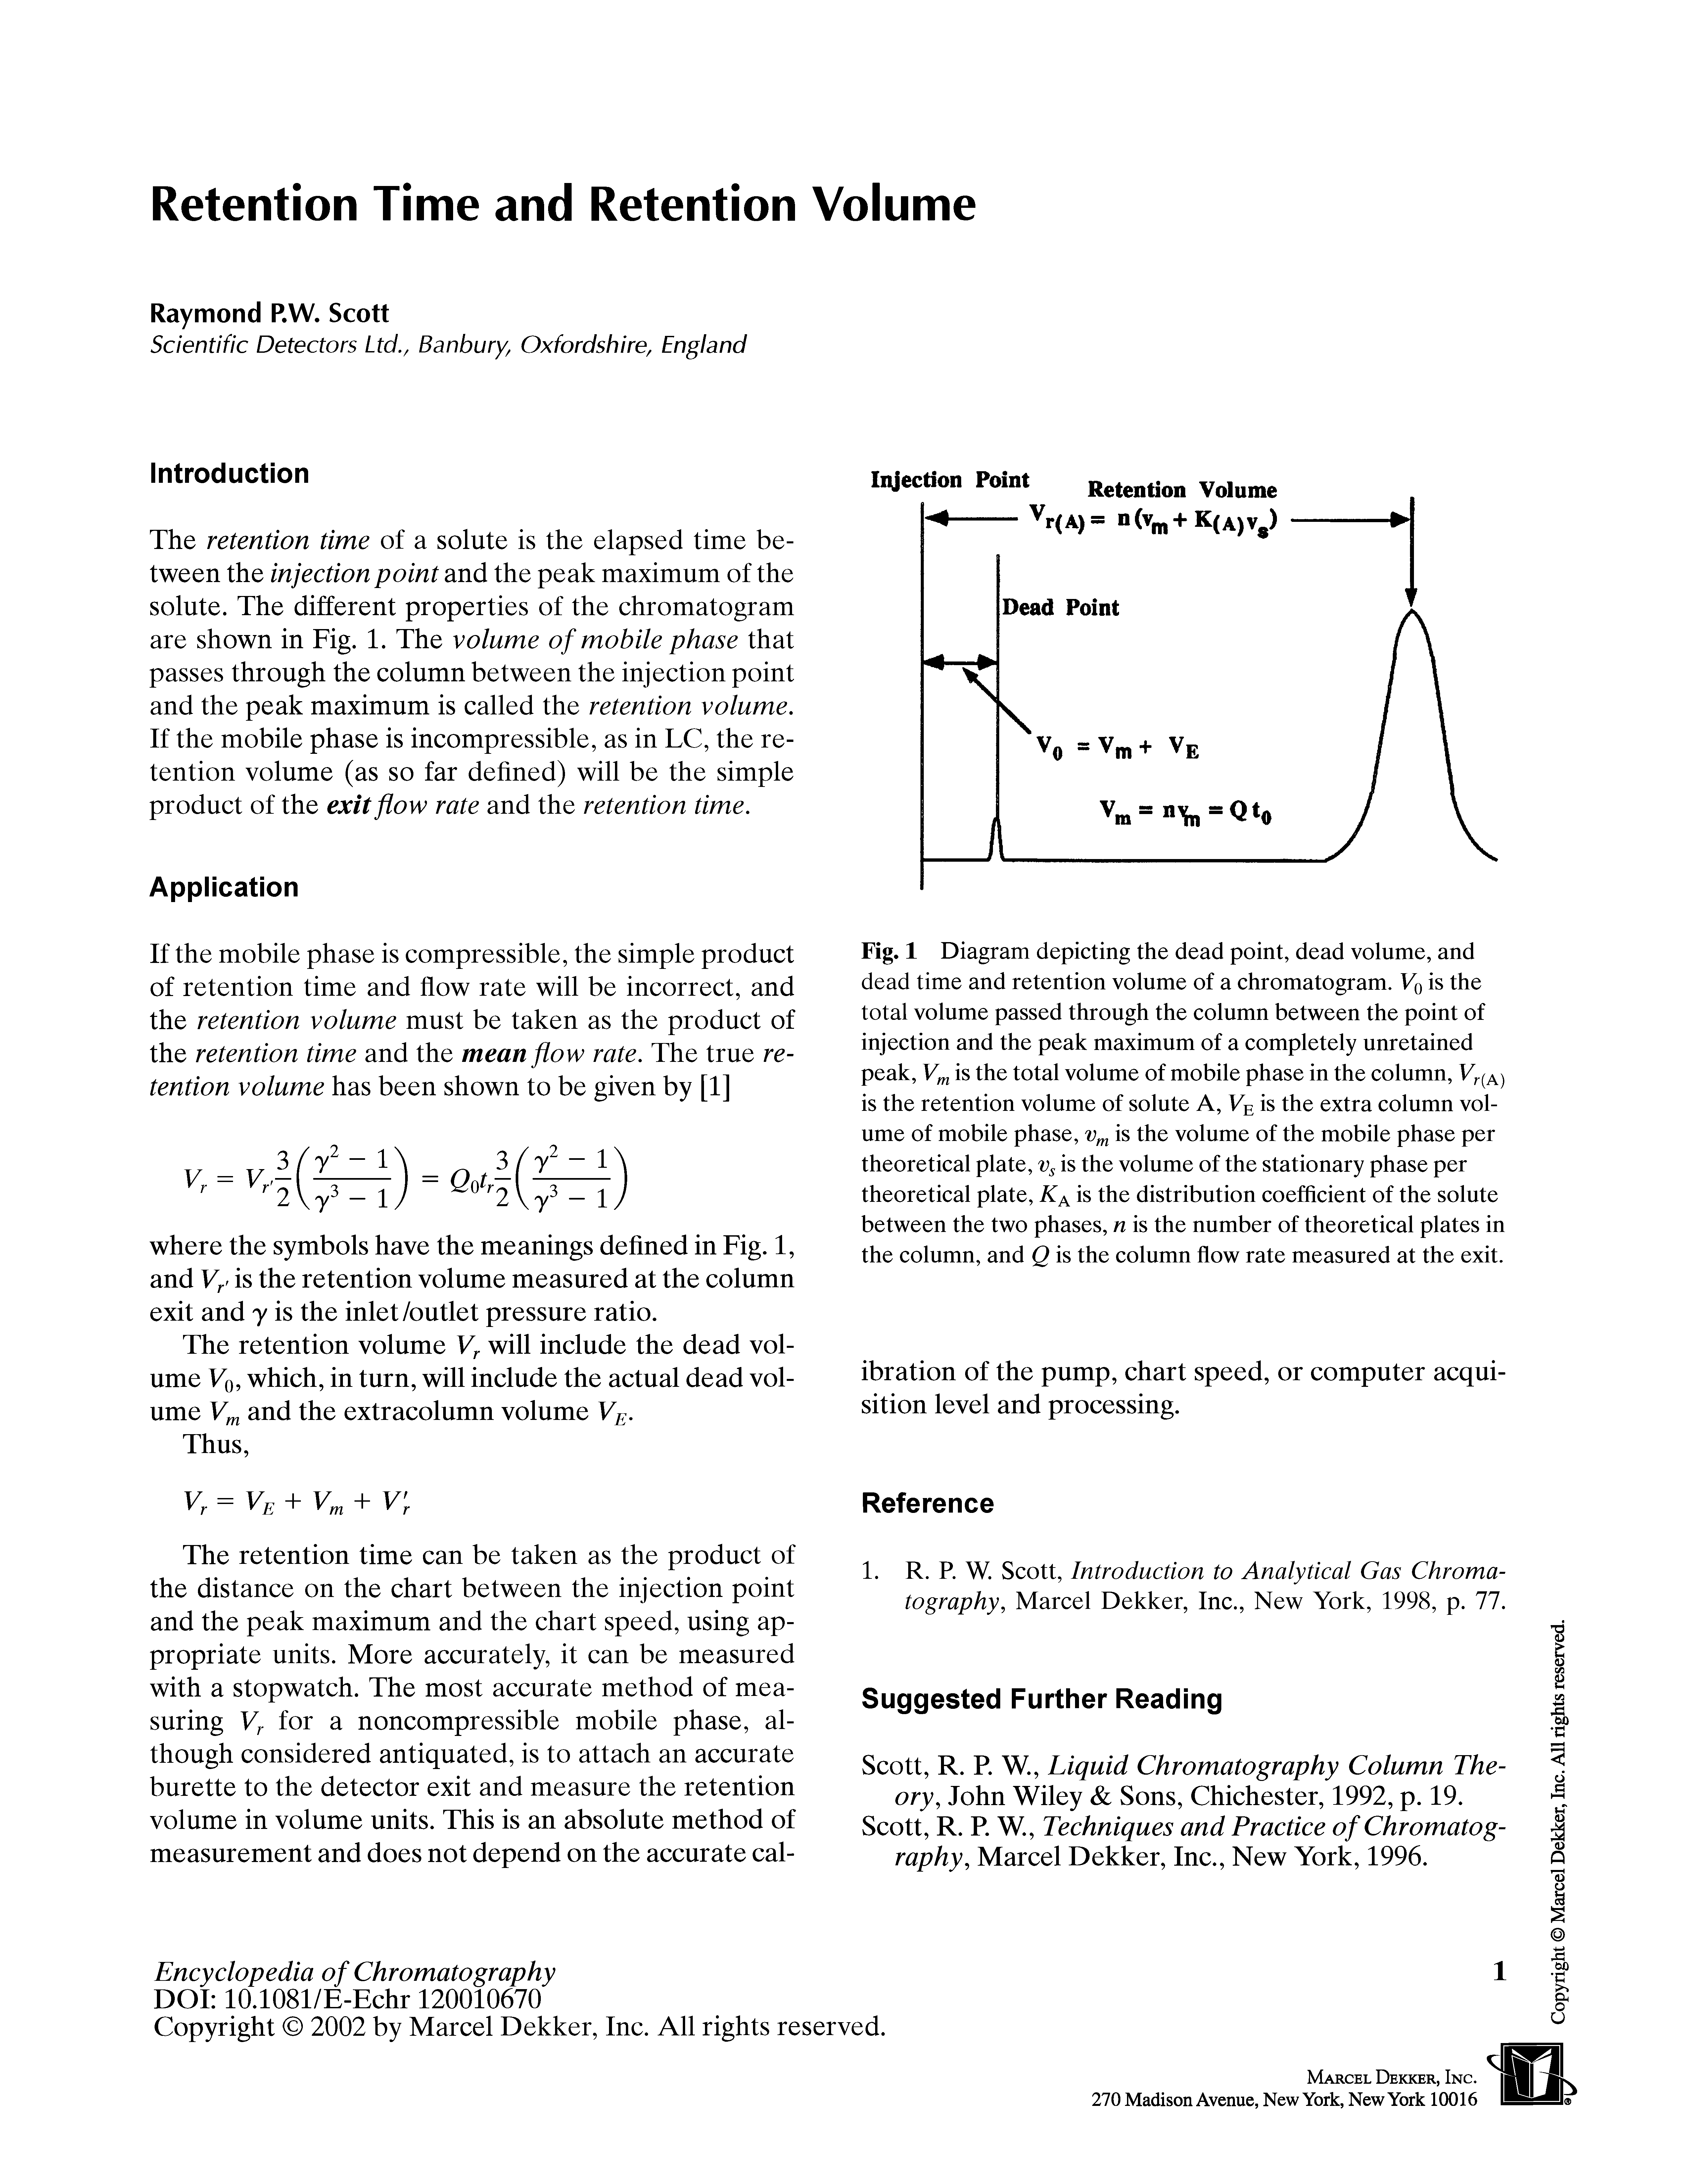 Fig. 1 Diagram depicting the dead point, dead volume, and dead time and retention volume of a chromatogram. Vq is the total volume passed through the column between the point of injection and the peak maximum of a completely unretained peak, is the total volume of mobile phase in the column, V (a)...